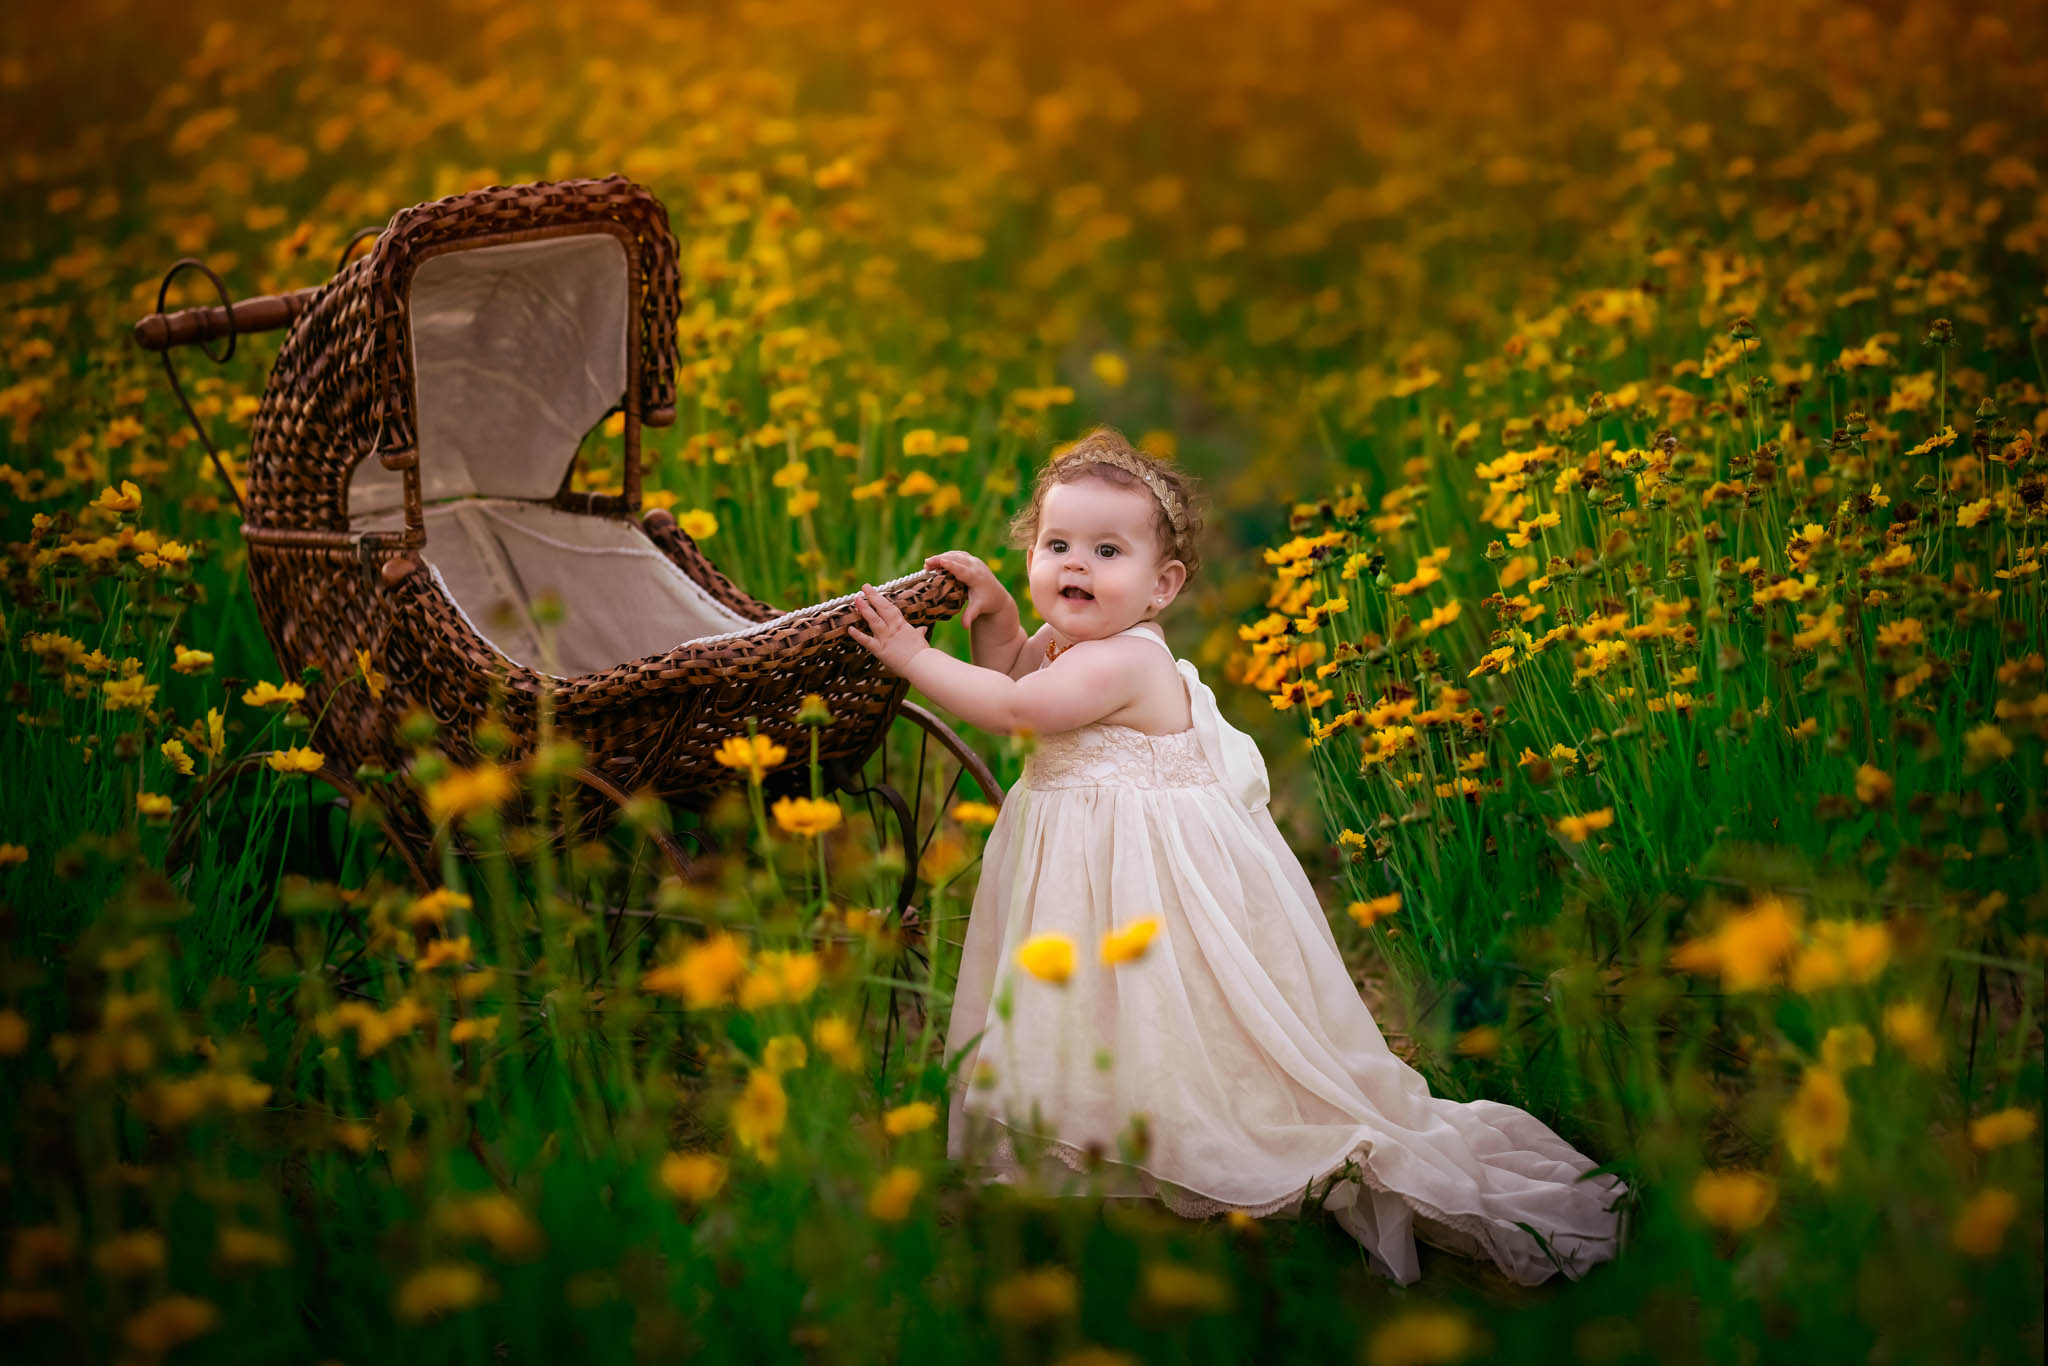 A young toddler walks through a field of yellow flowers with a wicker cradle raleigh summer camps